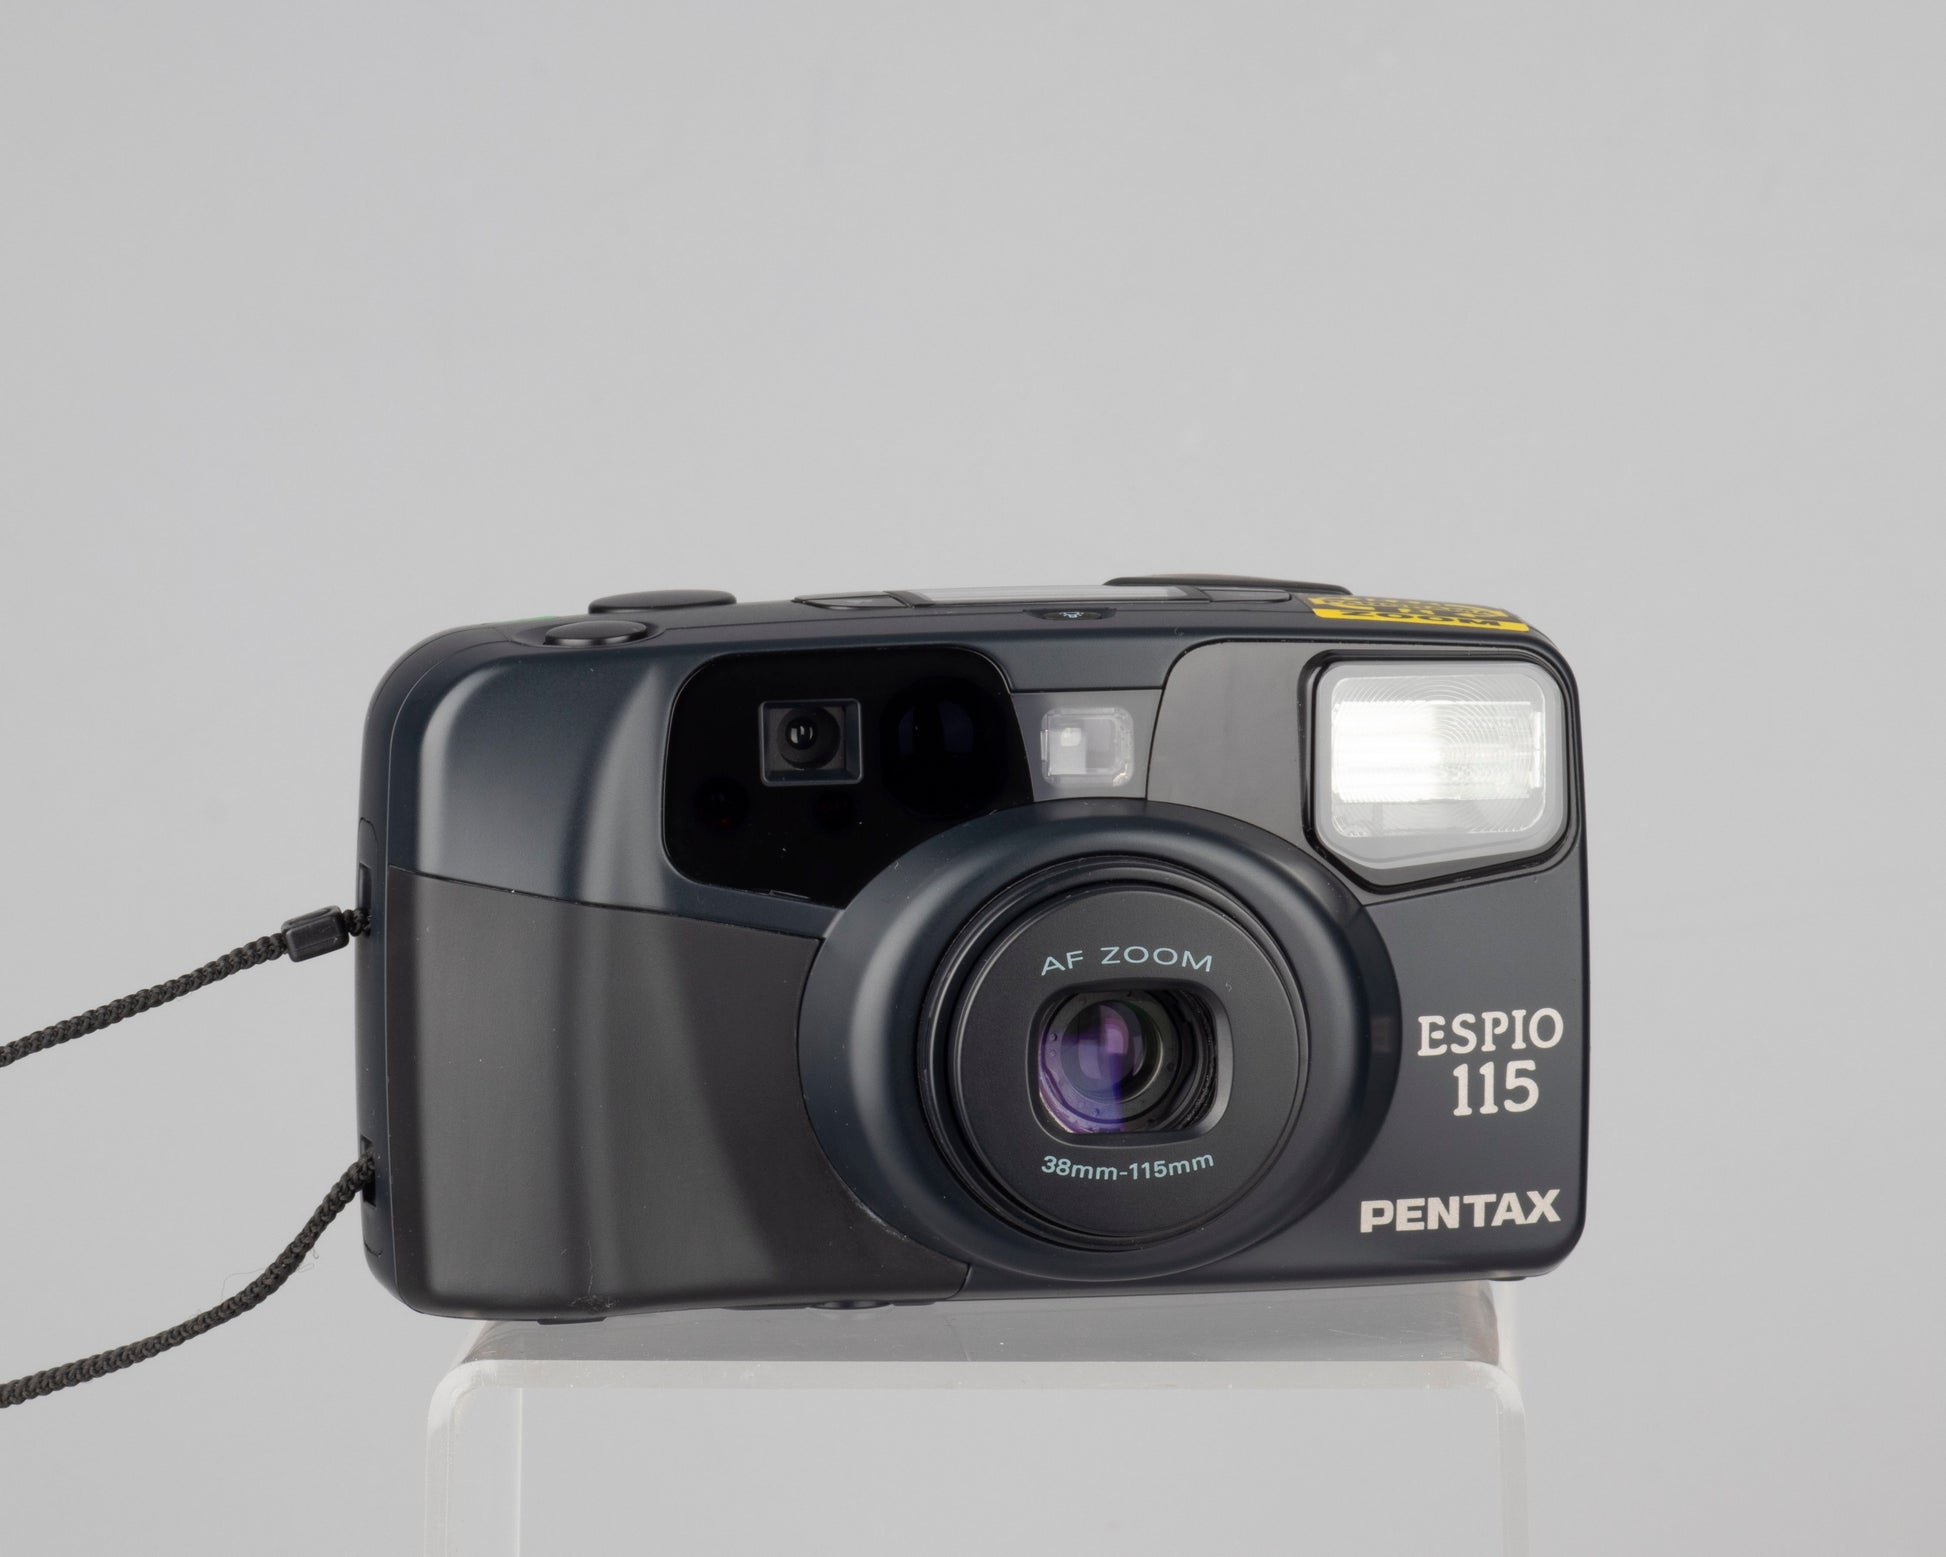 The Pentax Espio 115 (aka Pentax IQZoom 115) is a high quality 35mm point-and-shoot released in 1993